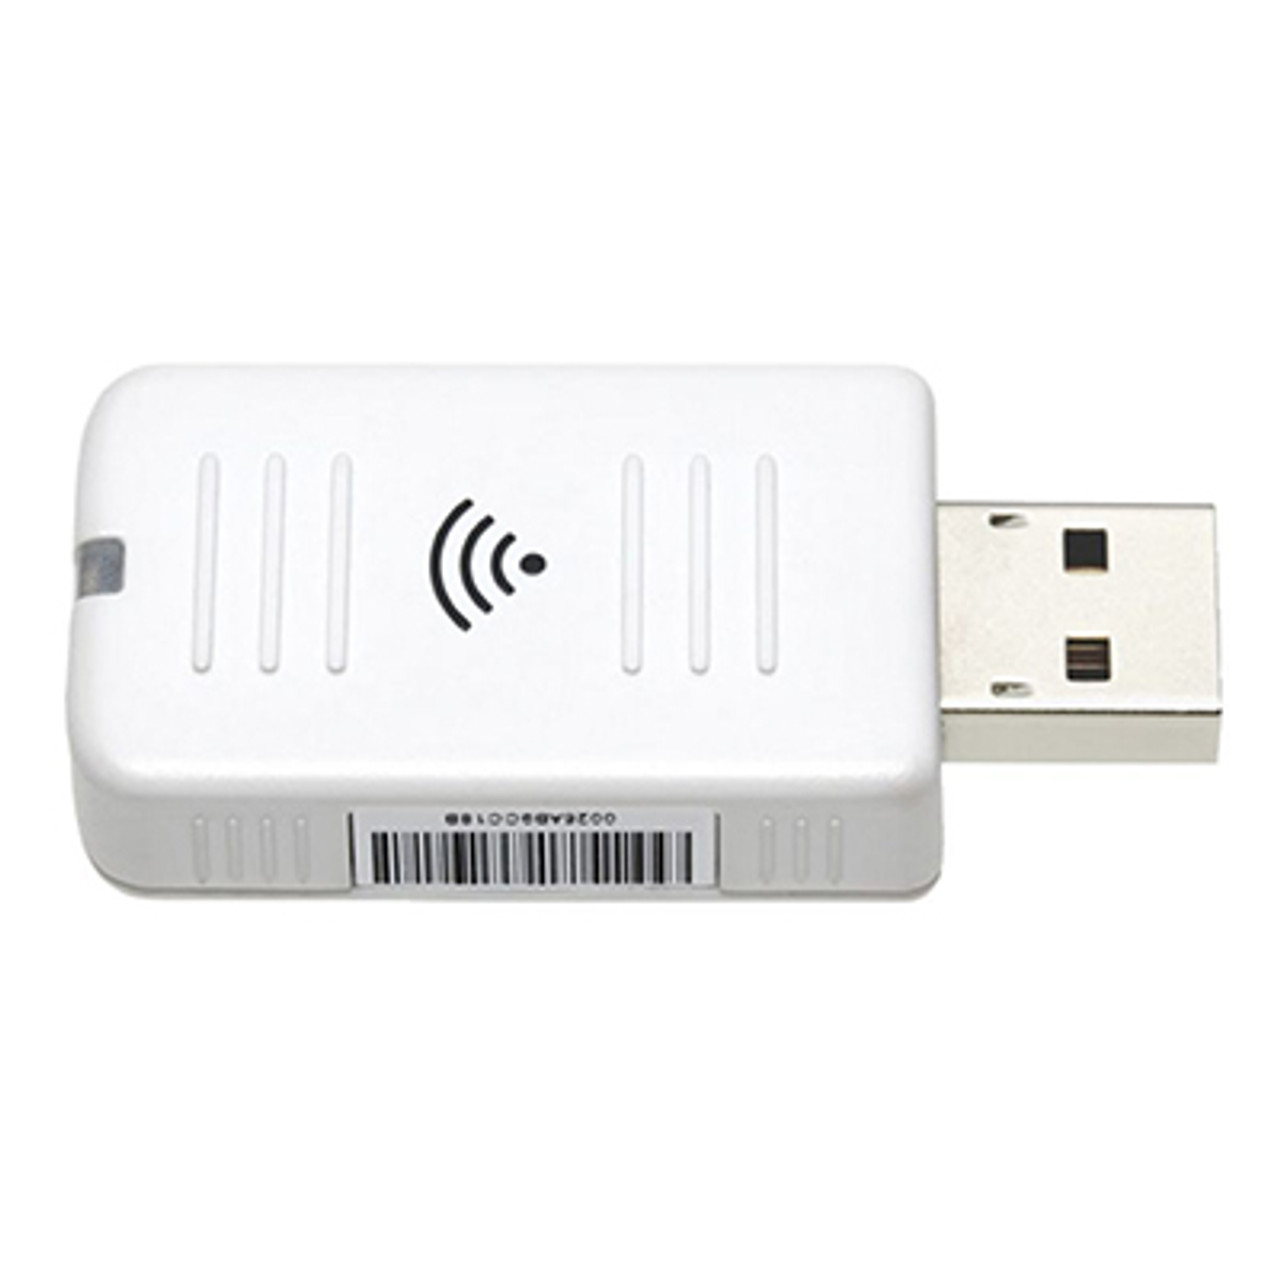 Epson WiFi Dongle TM-M30/TM-T88VI/TM-T82II/TM-T88VI-i - The Barcode Store